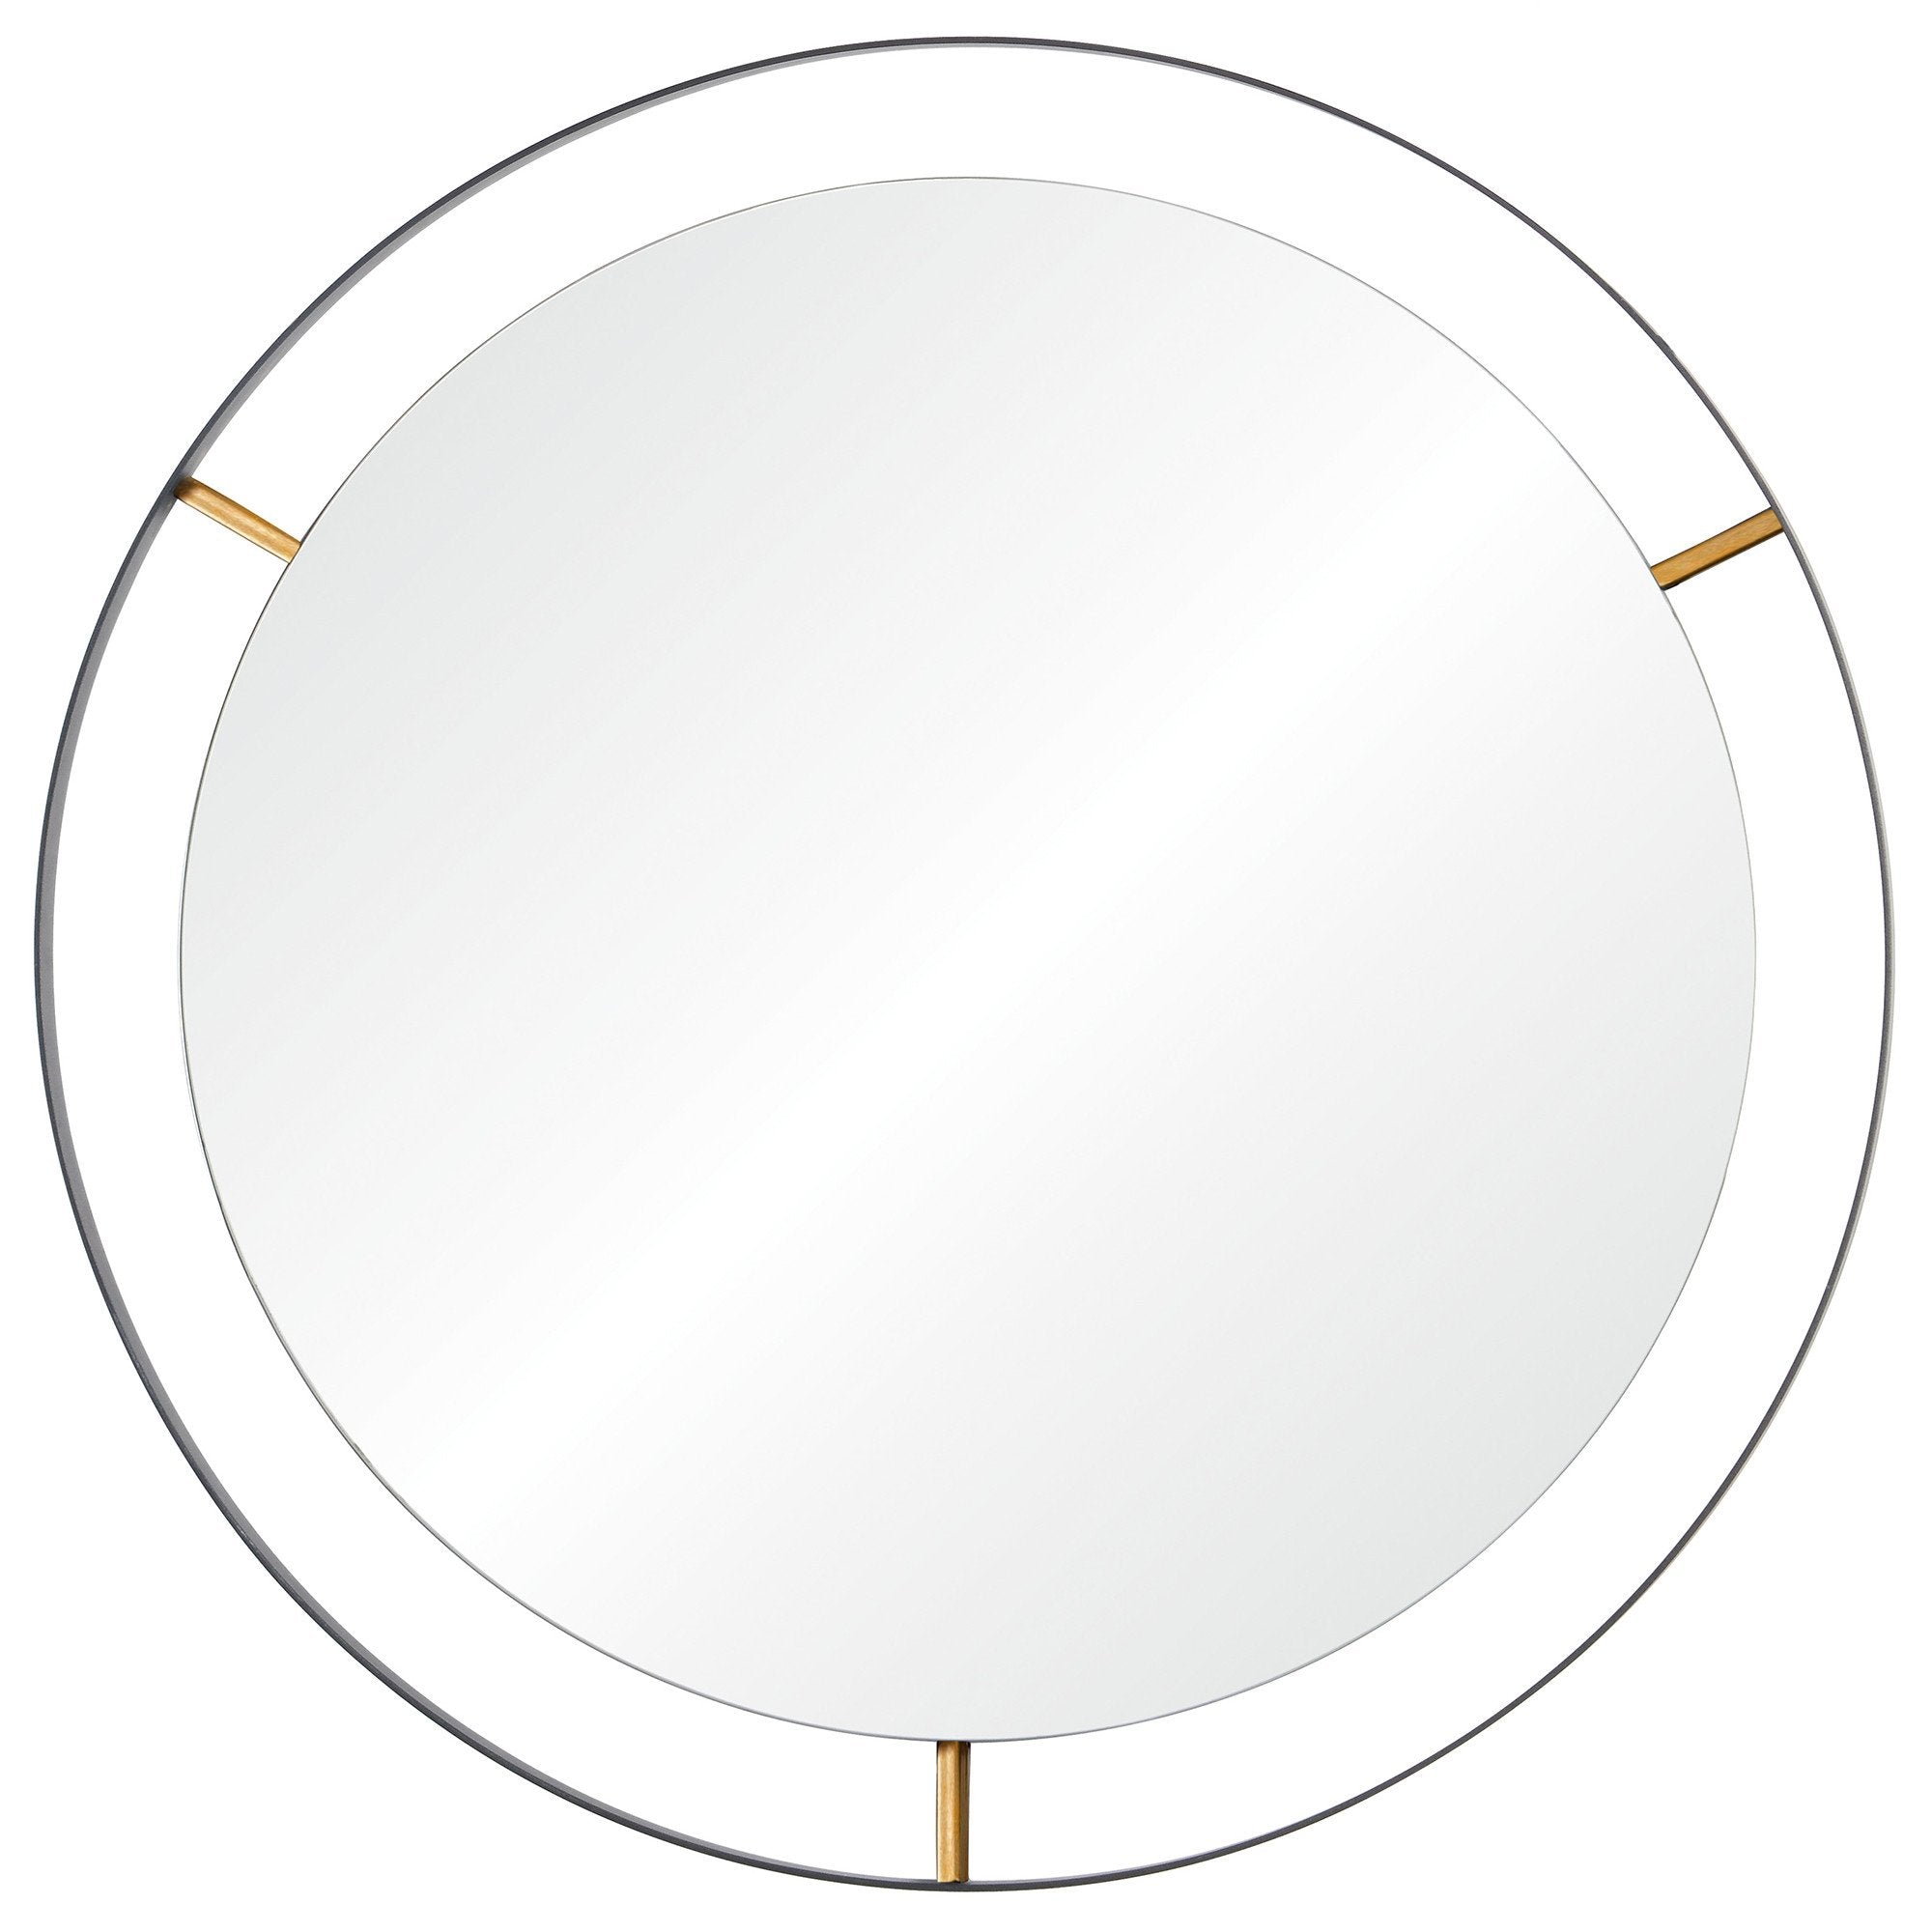 Framed 610010 30 Inch Round Wall Mirror Black With Antique Gold Varaluz